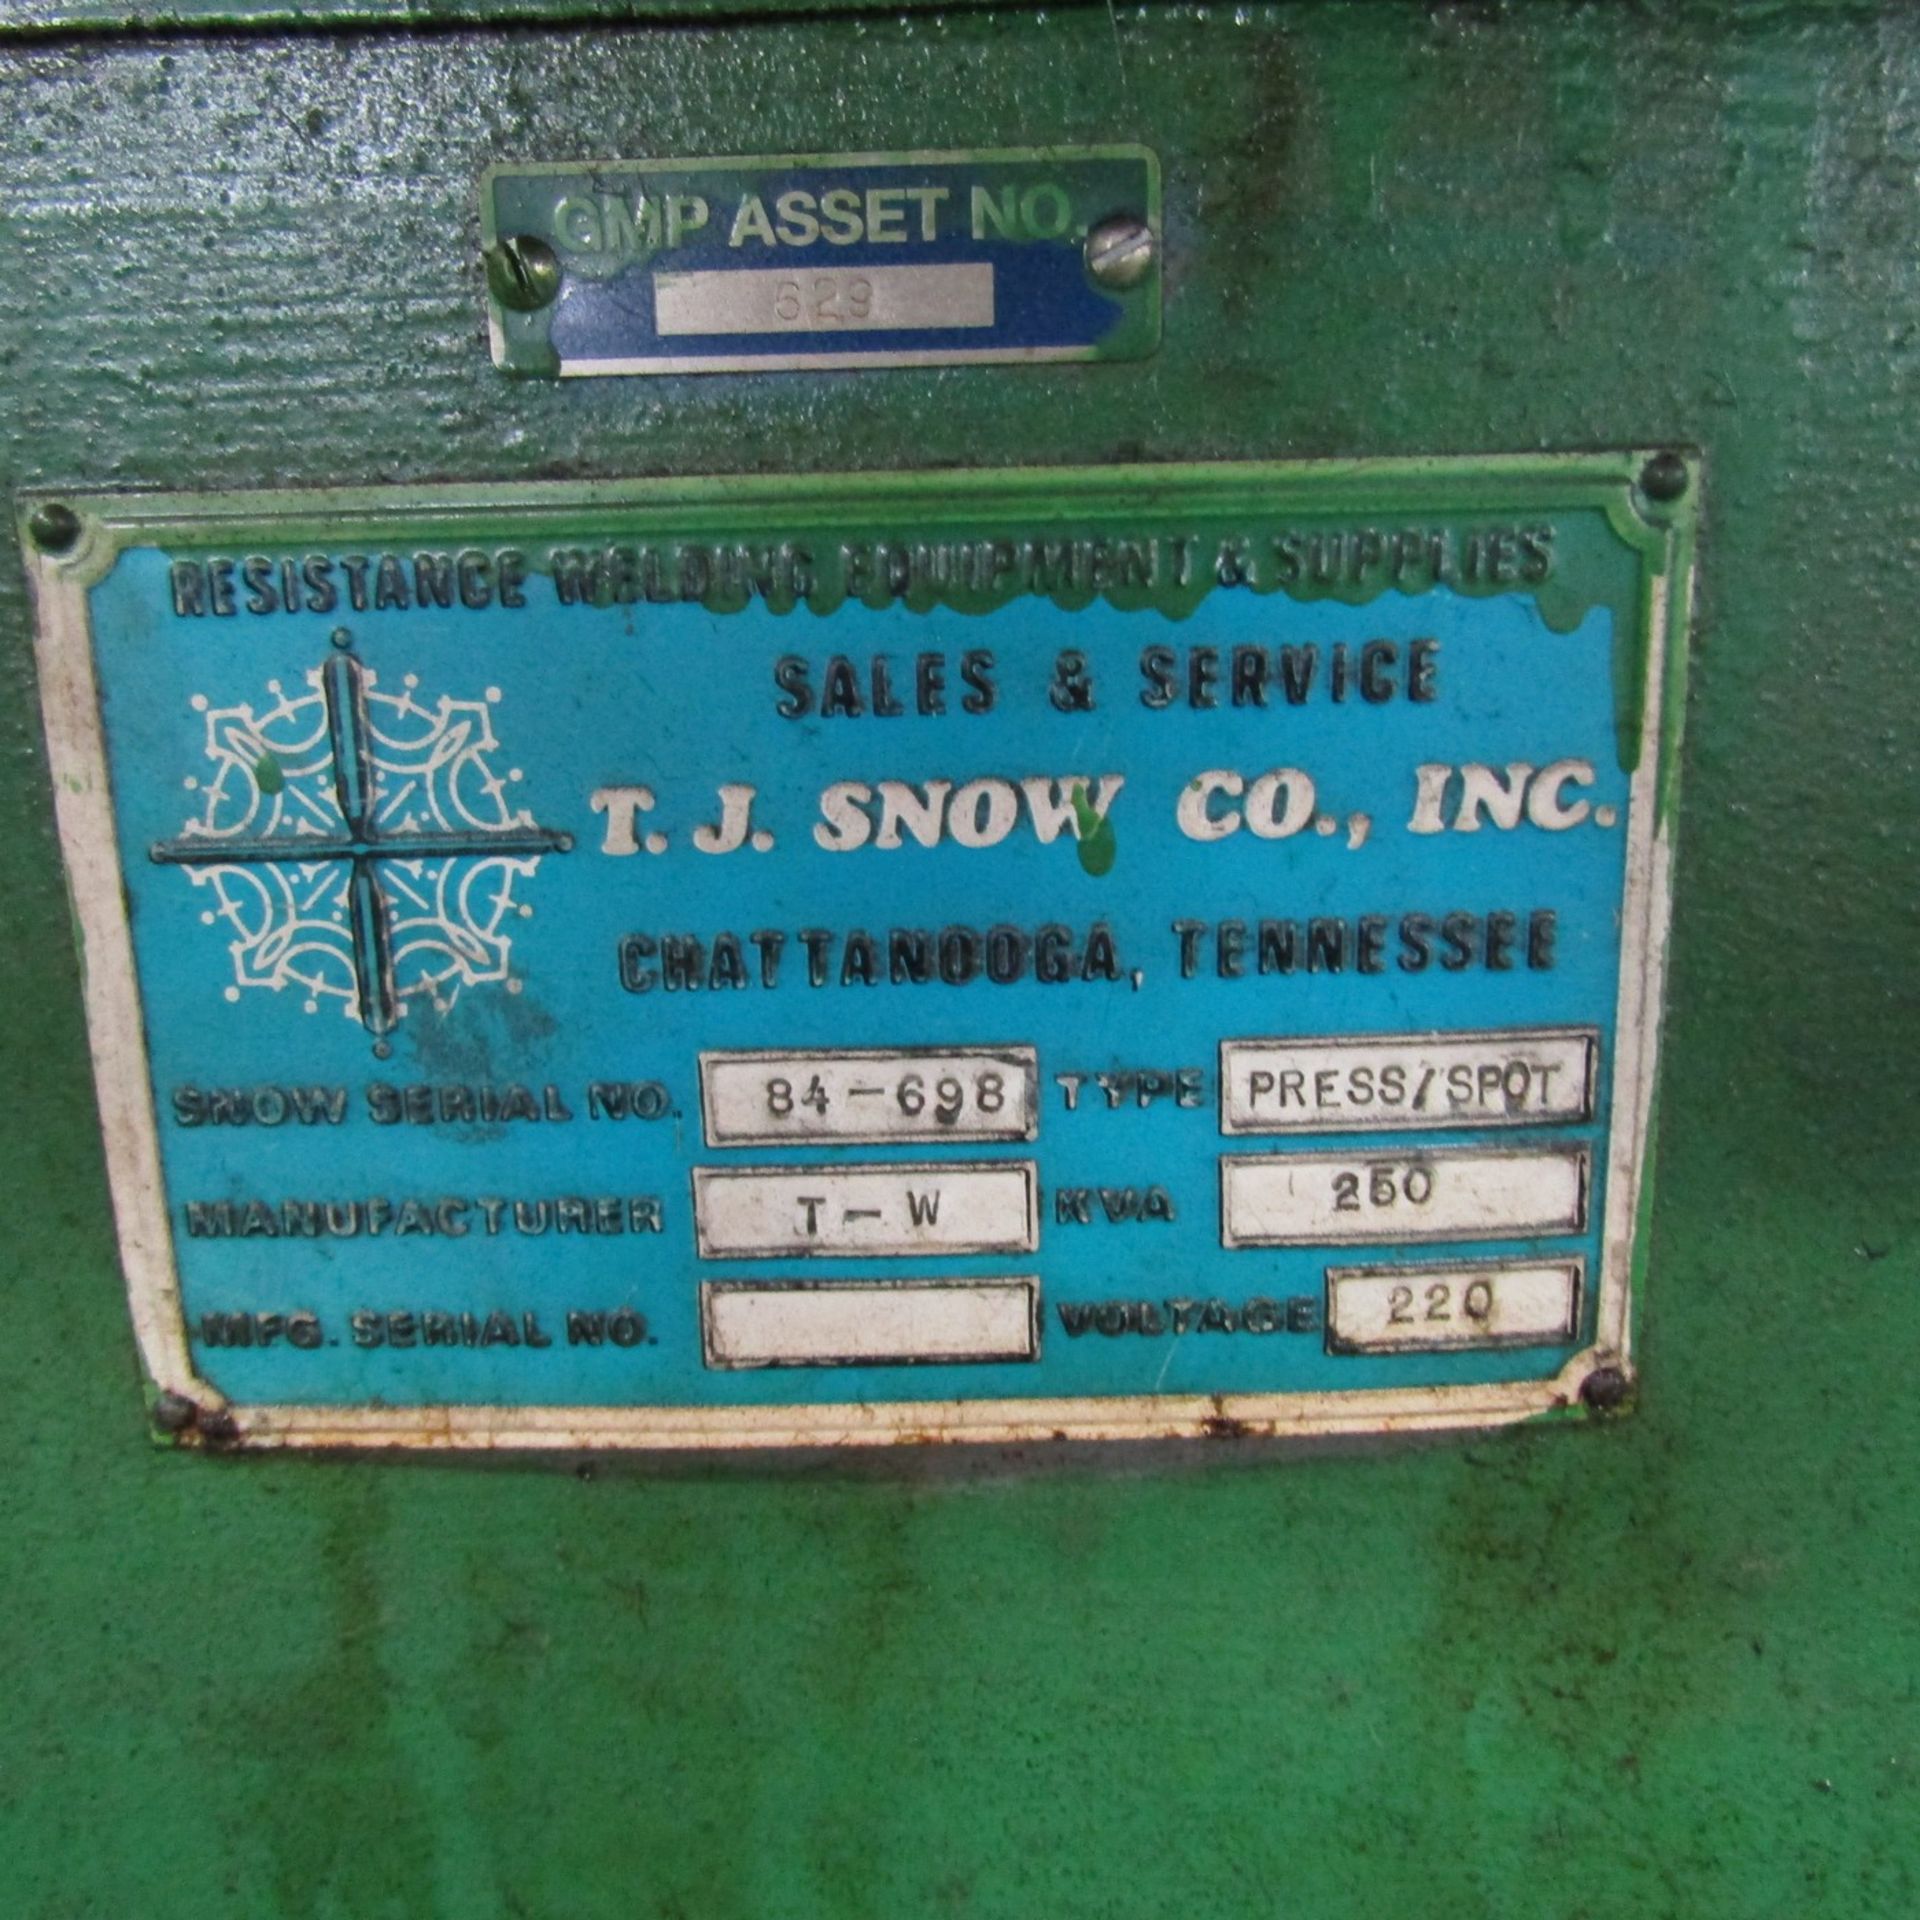 Taylor Winfield/TJ Snow250-KVA Spot Welder, S/N: 84-698; with 12 in. Throat (TJ Snow S/N: 49943) ( - Image 7 of 7